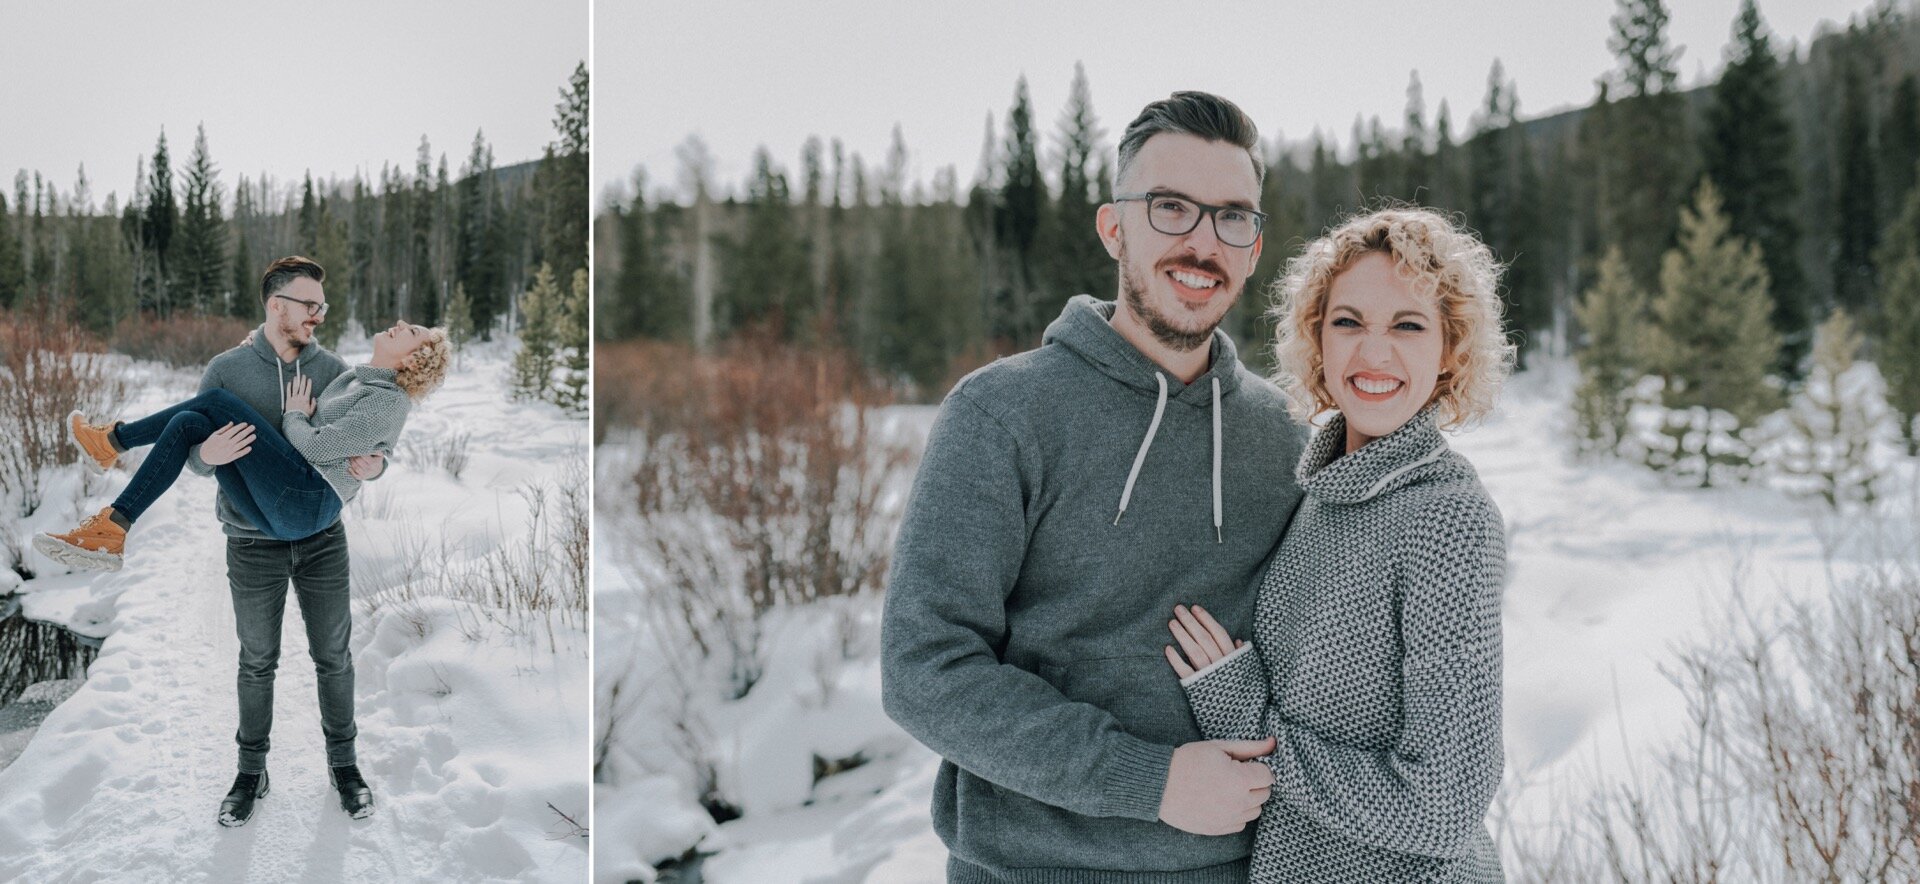 06_Kelsey&Taylor022_Kelsey&Taylor023_frisco_Photographer_engagement_Co_Hannah_Session_Photography_Minnesota_Snowy_Colorado_adventure_ampe_Mountain_engaged.jpg